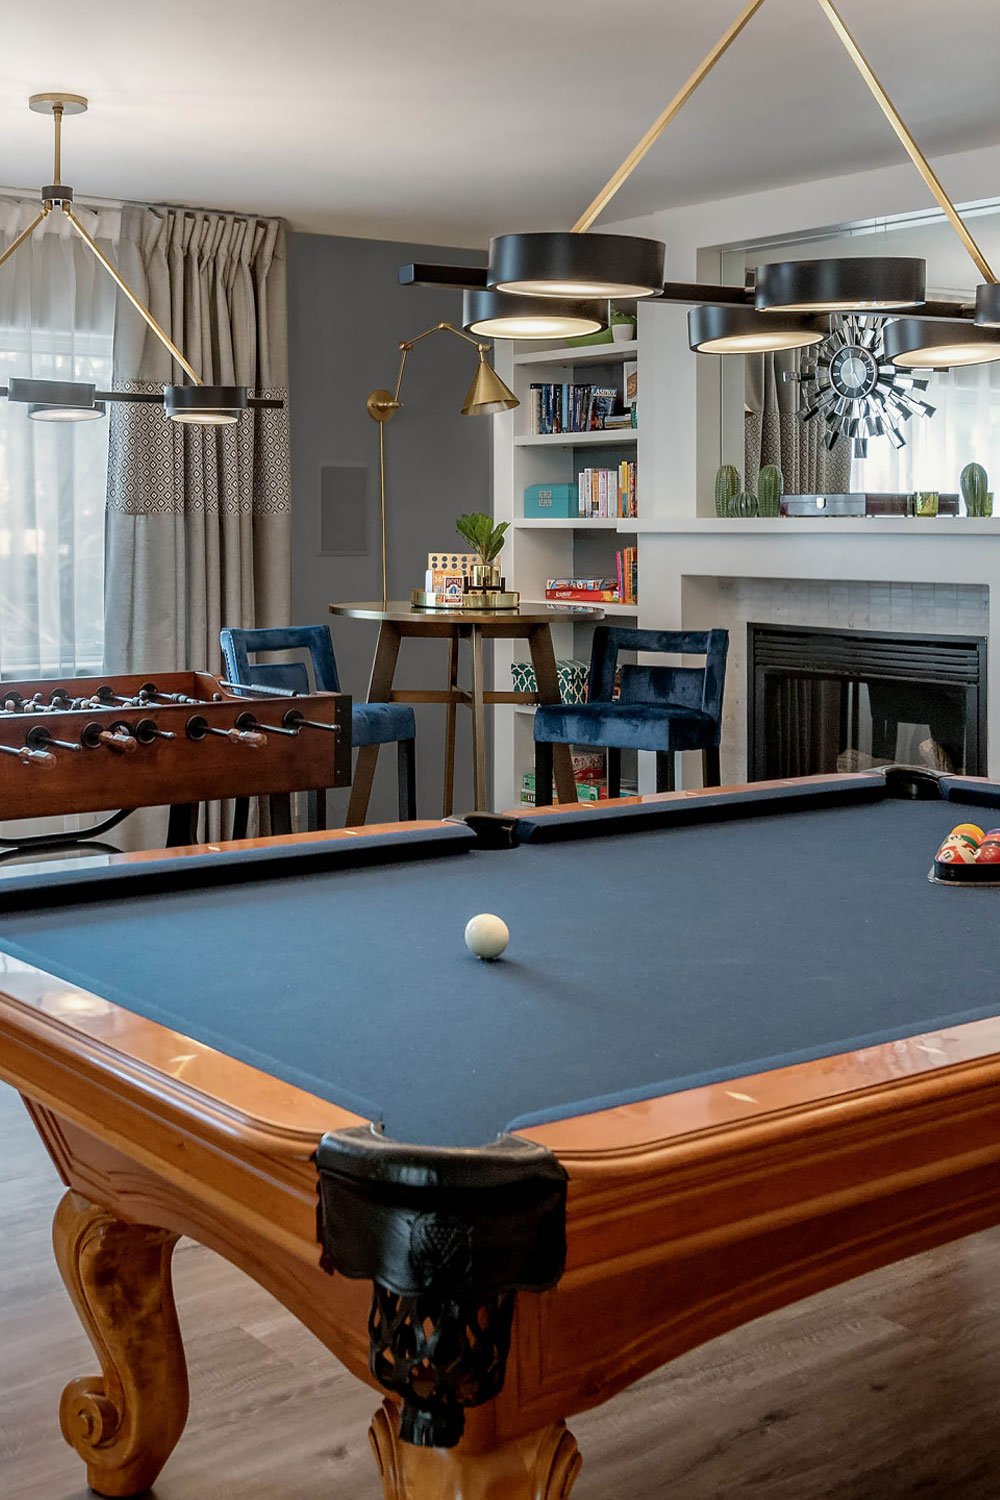 pool - Basement Game Room Ideas; Here are some brilliantly entertaining game room basement ideas with game room decor to spark your next project!